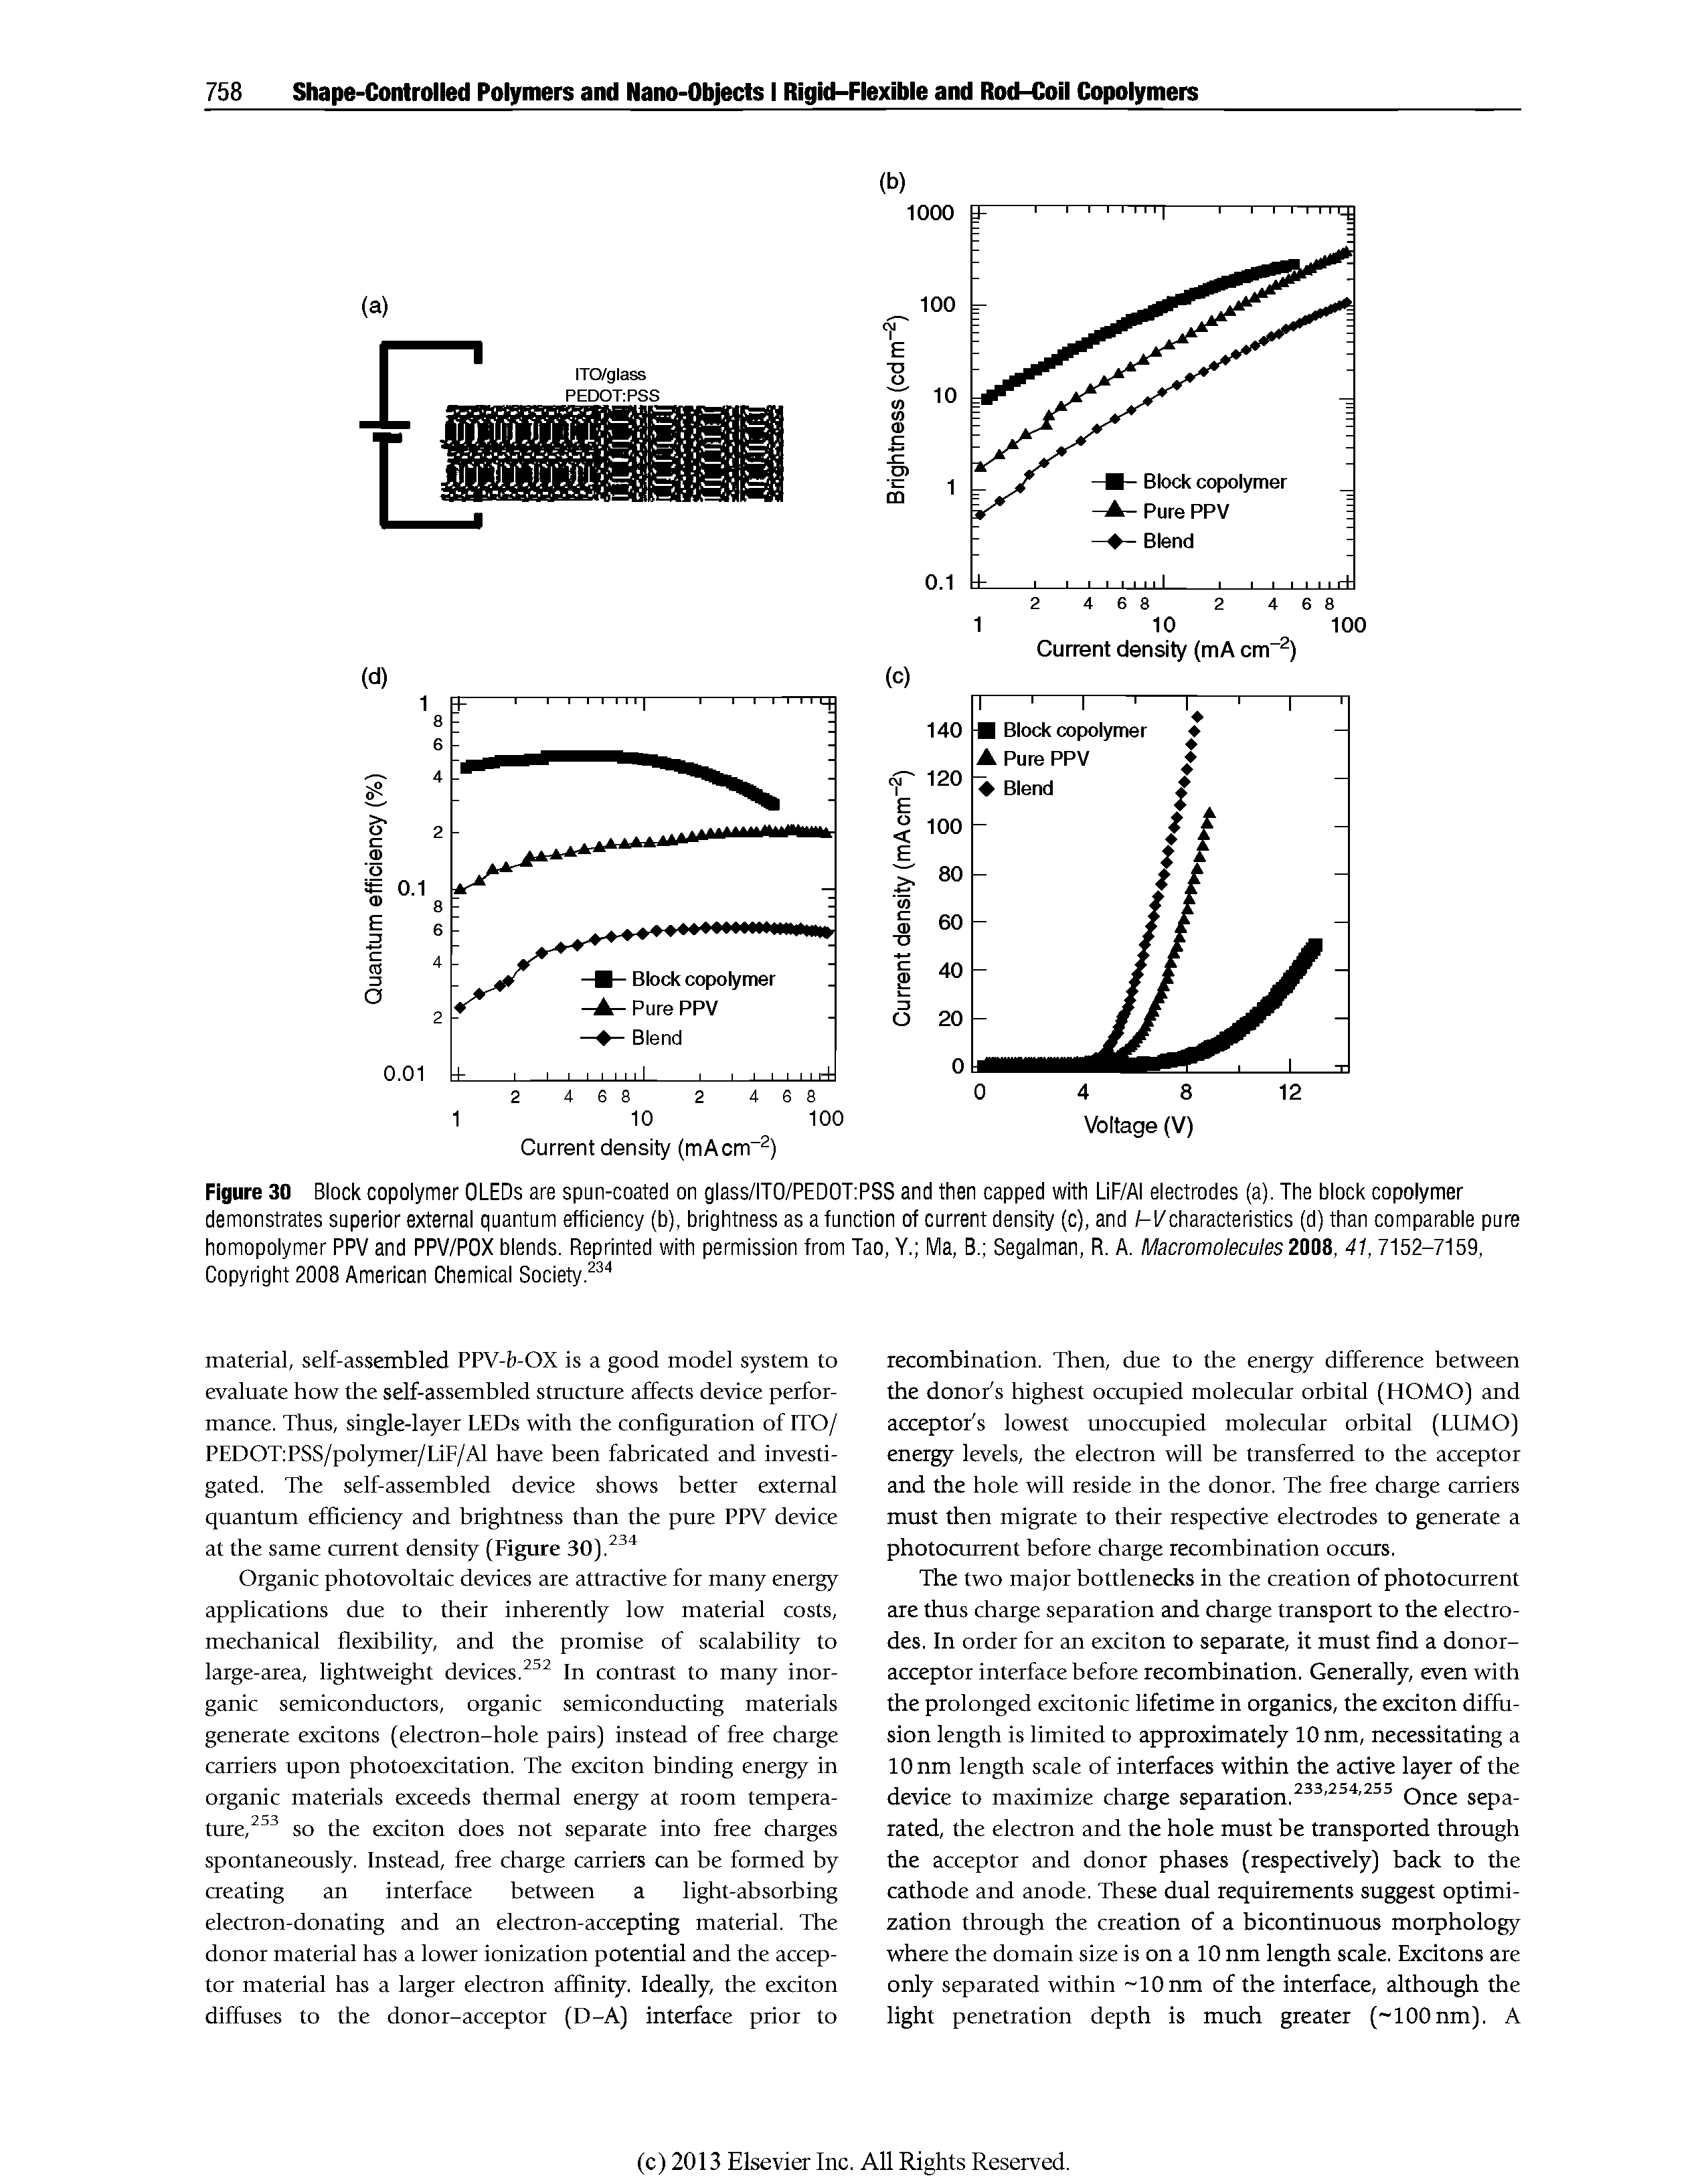 Figure 30 Block copolymer OLEDs are spun-coated on glass/ITO/PEDOT PSS and then capped with LIF/AI electrodes (a). The block copolymer demonstrates superior external quantum efficiency (b), brightness as a function of current density (c), and /-I/characteristics (d) than comparable pure homopolymer PPV and PPV/POX blends. Reprinted with permission from Tao, Y. Ma, B. Segalman, R. A. Macromolecules 200S, 41,7152-7159, Copyright 2008 American Chemical Society. ...